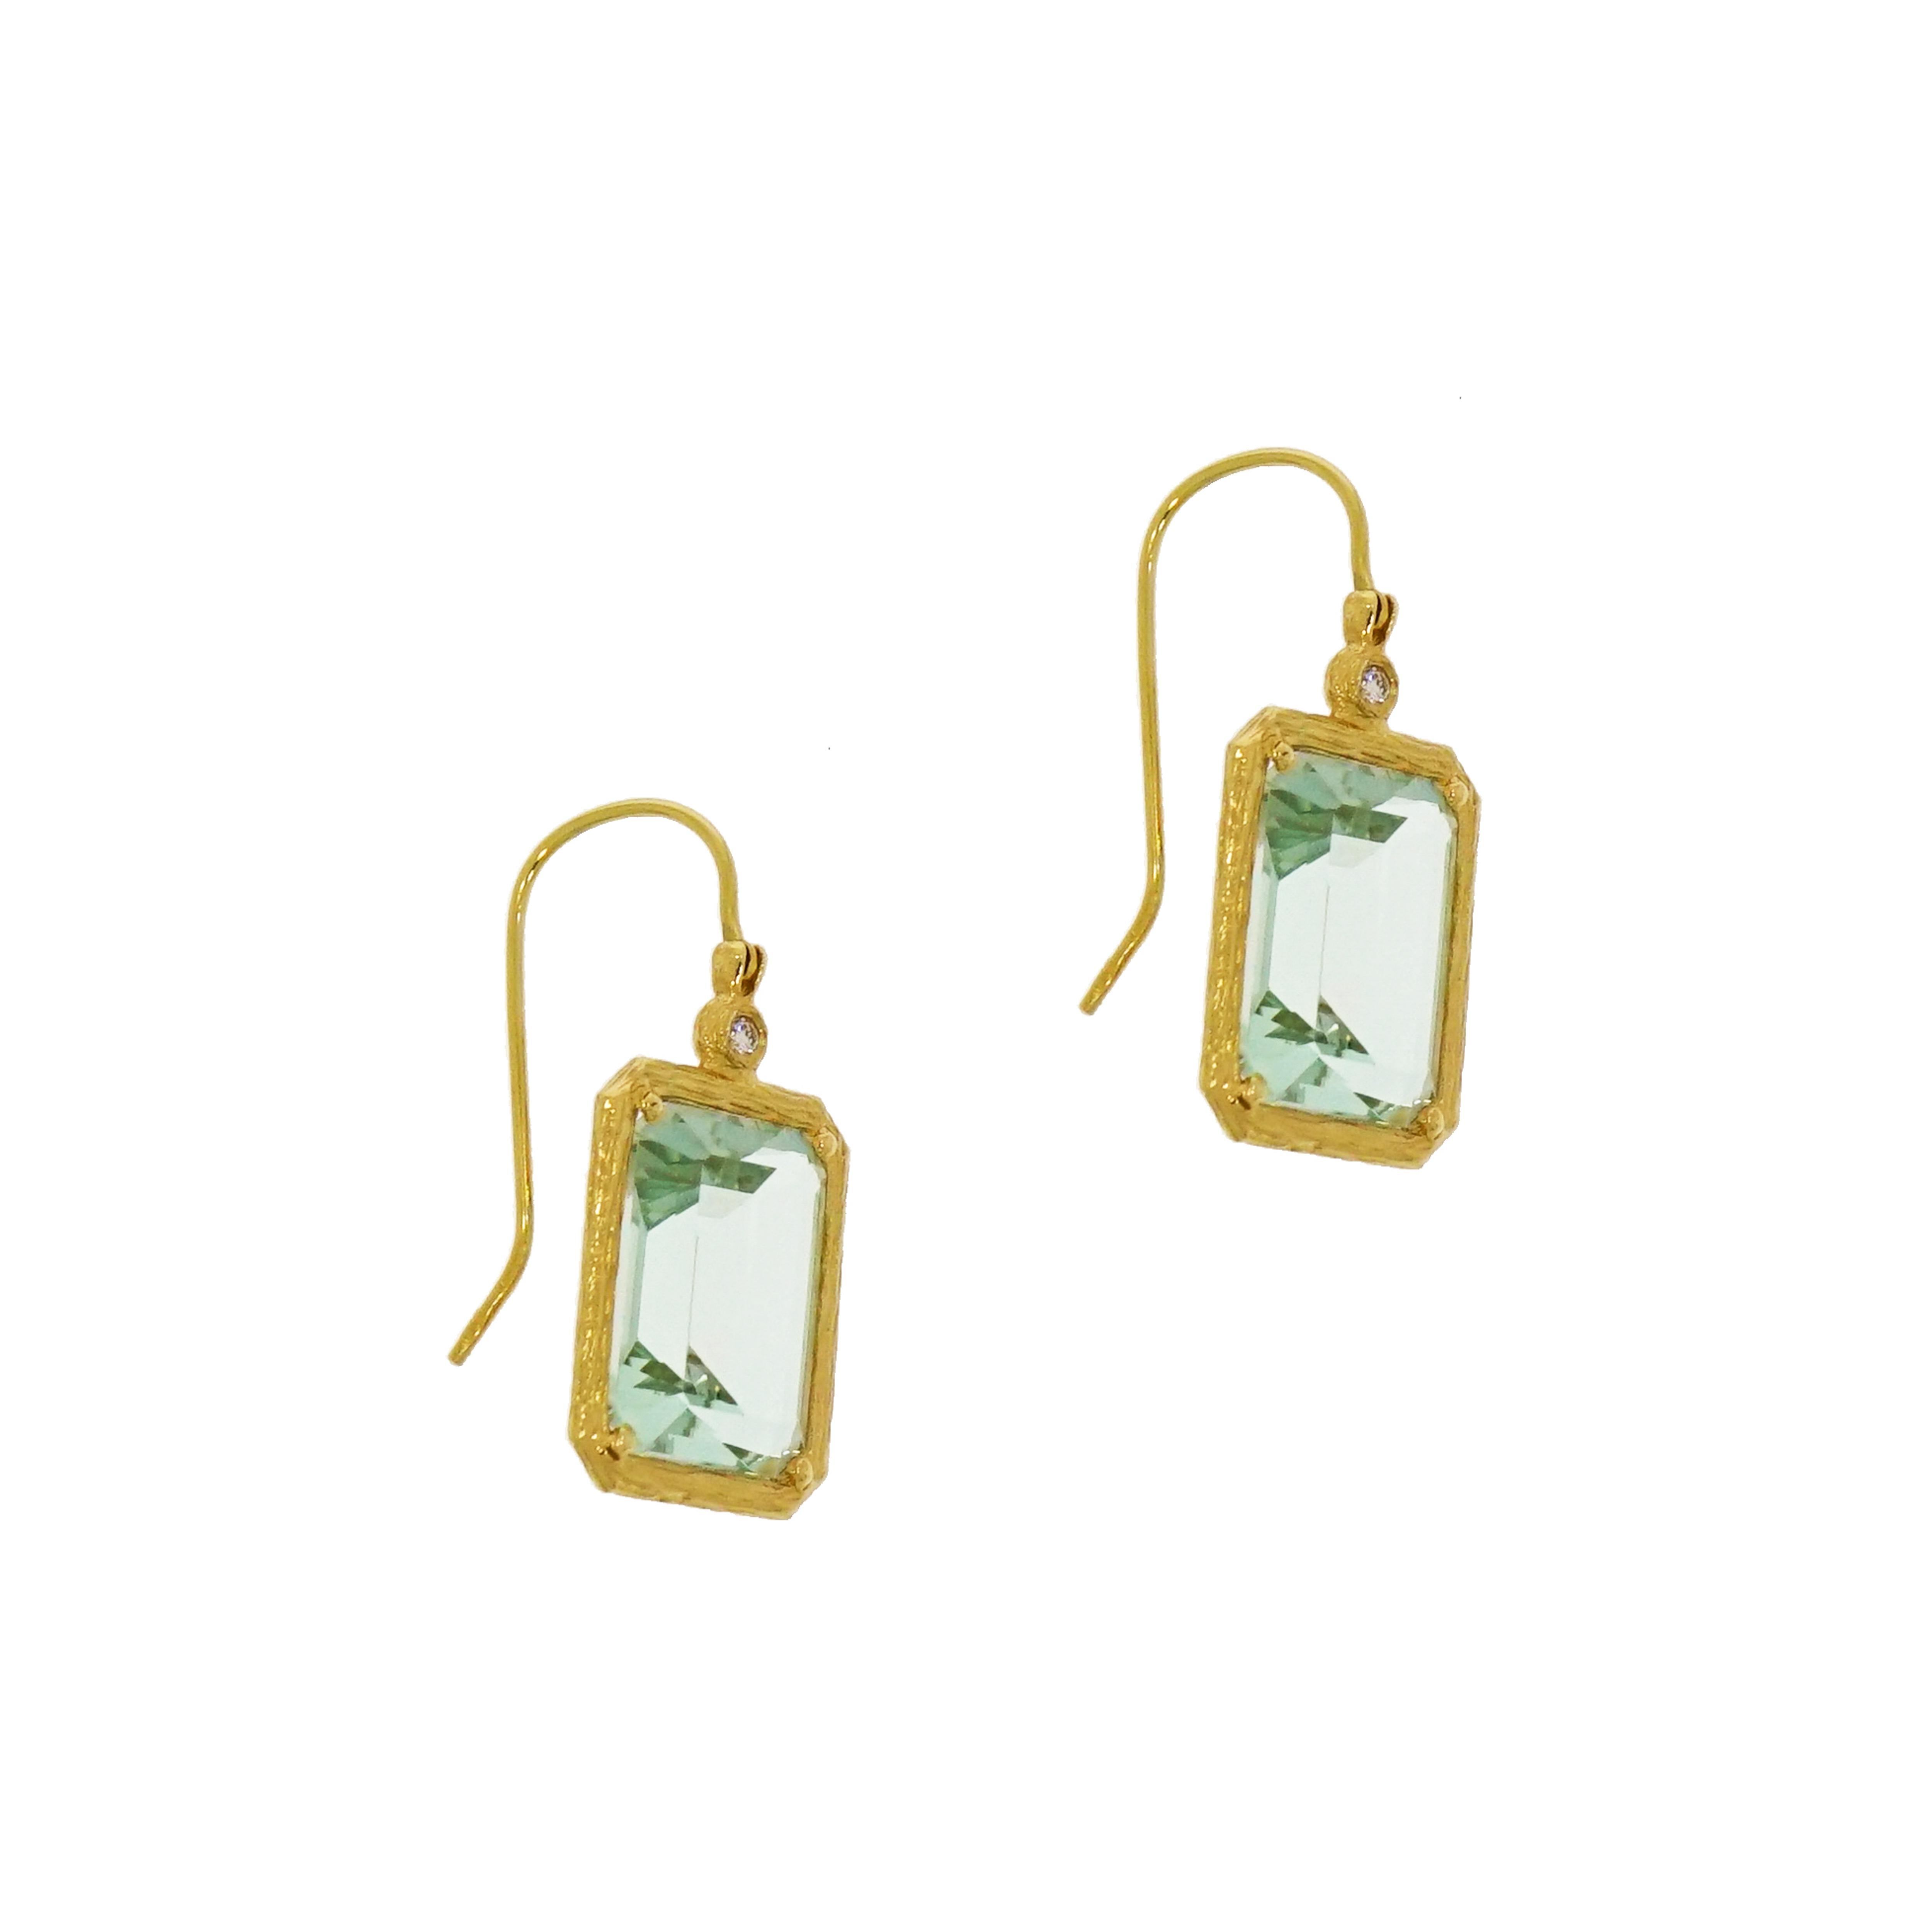 Take a moment to fall in love with our captivating Green Amethyst Drop earrings handcrafted in 14k yellow gold.... will mesmerize you and demand everybody's attention.
Created especially for you, for everyday as well as the most precious life